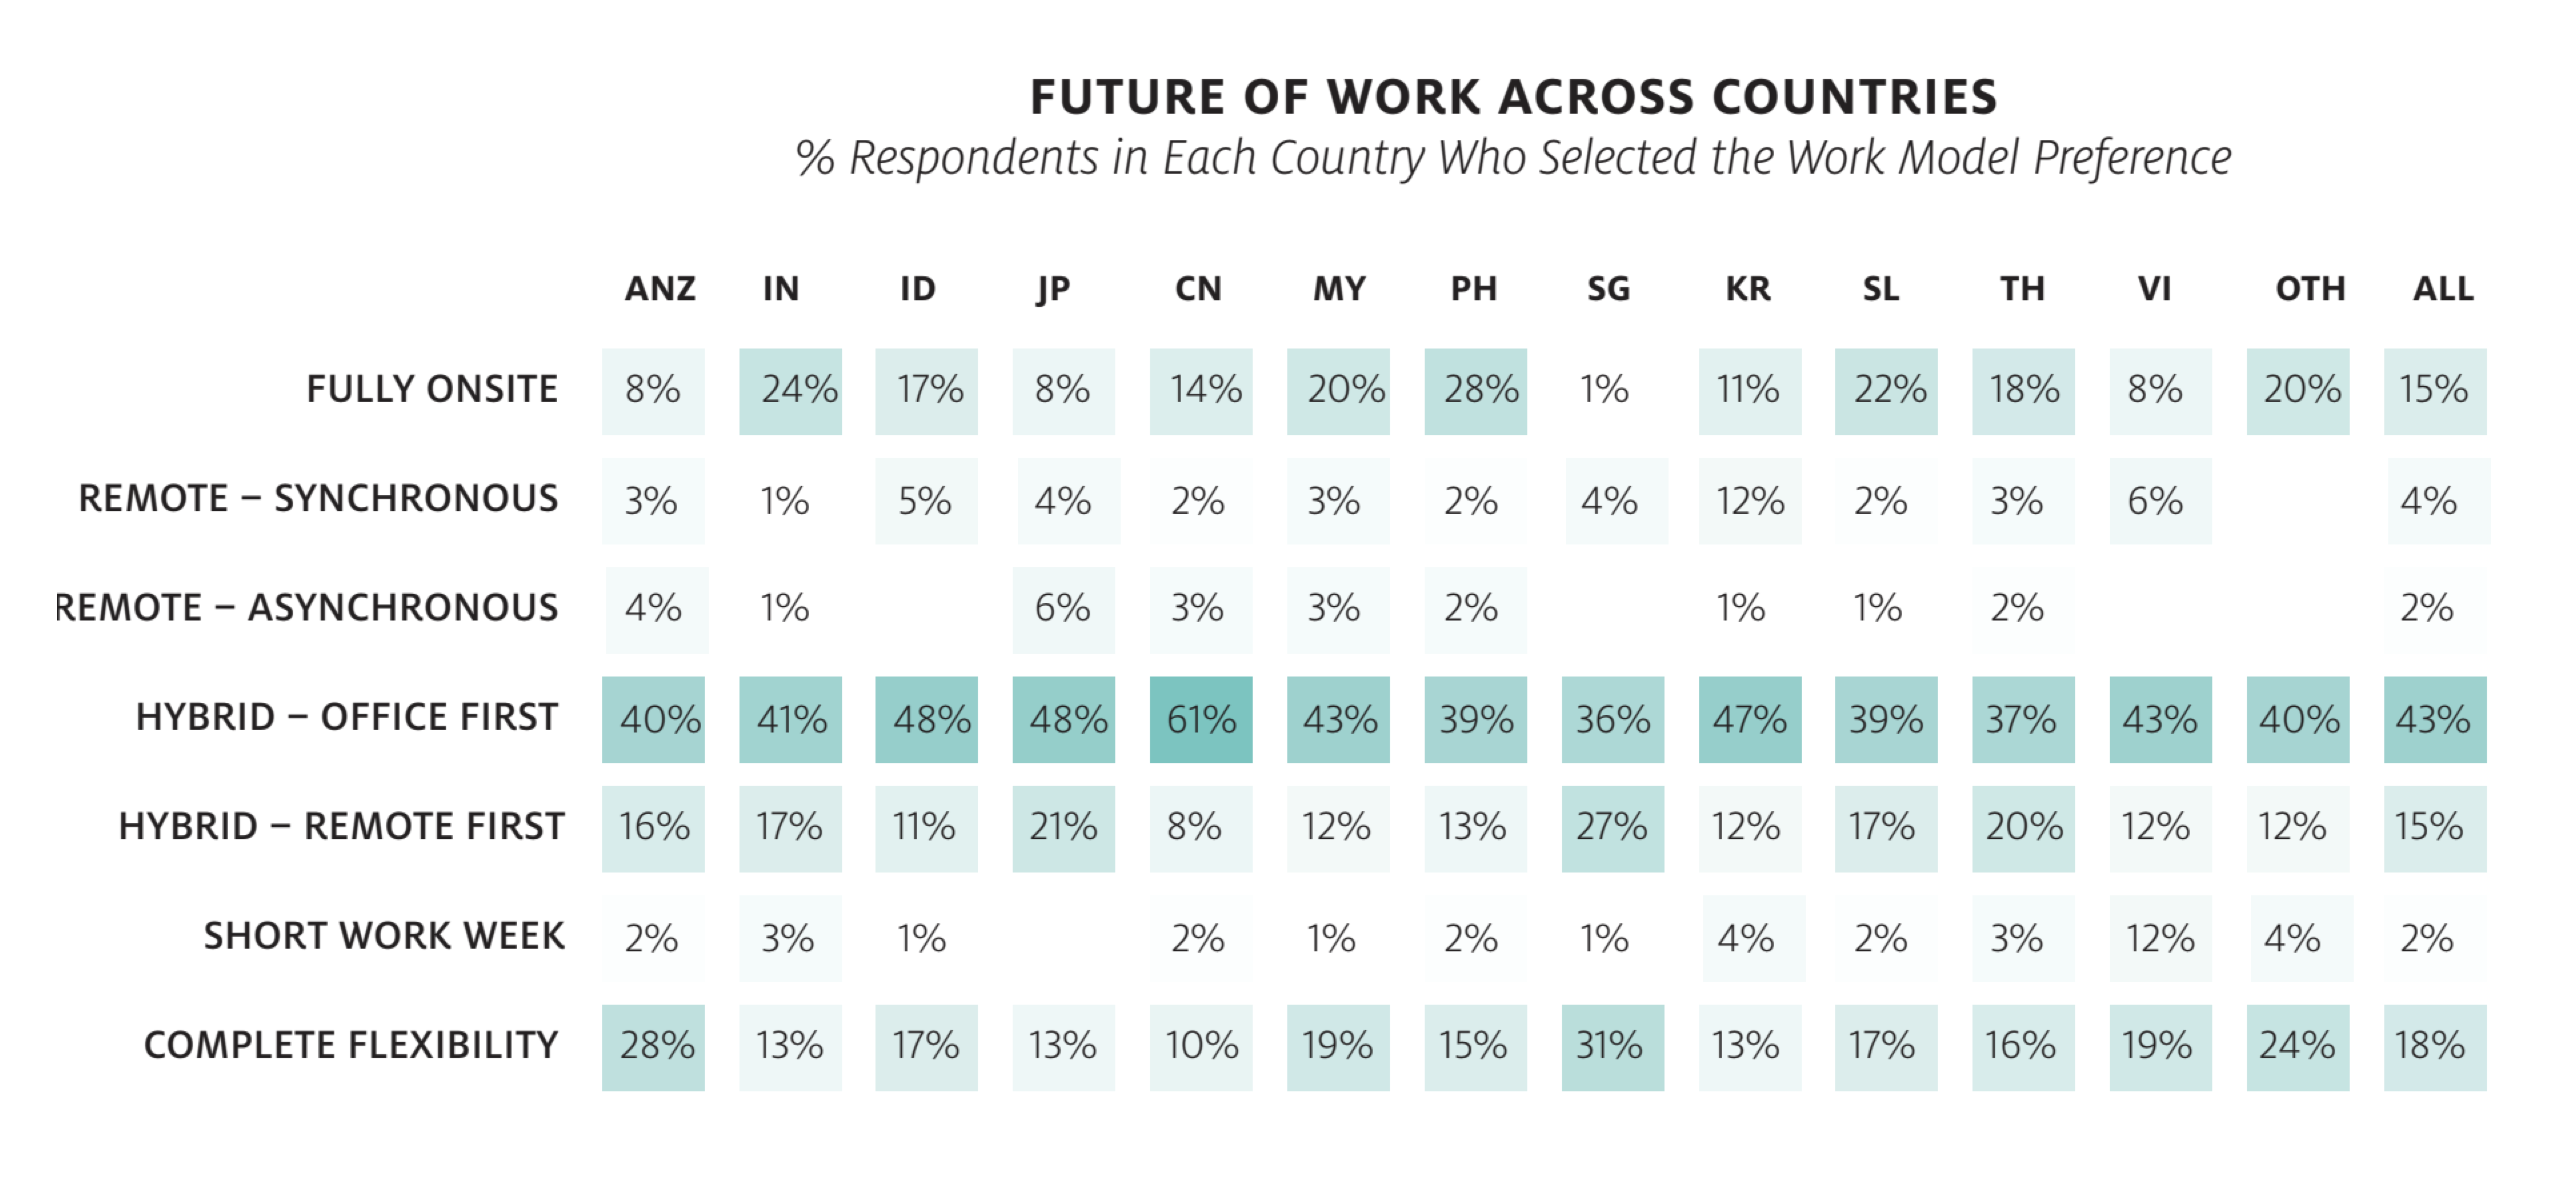 FUTURE OF WORK ACROSS COUNTRIES